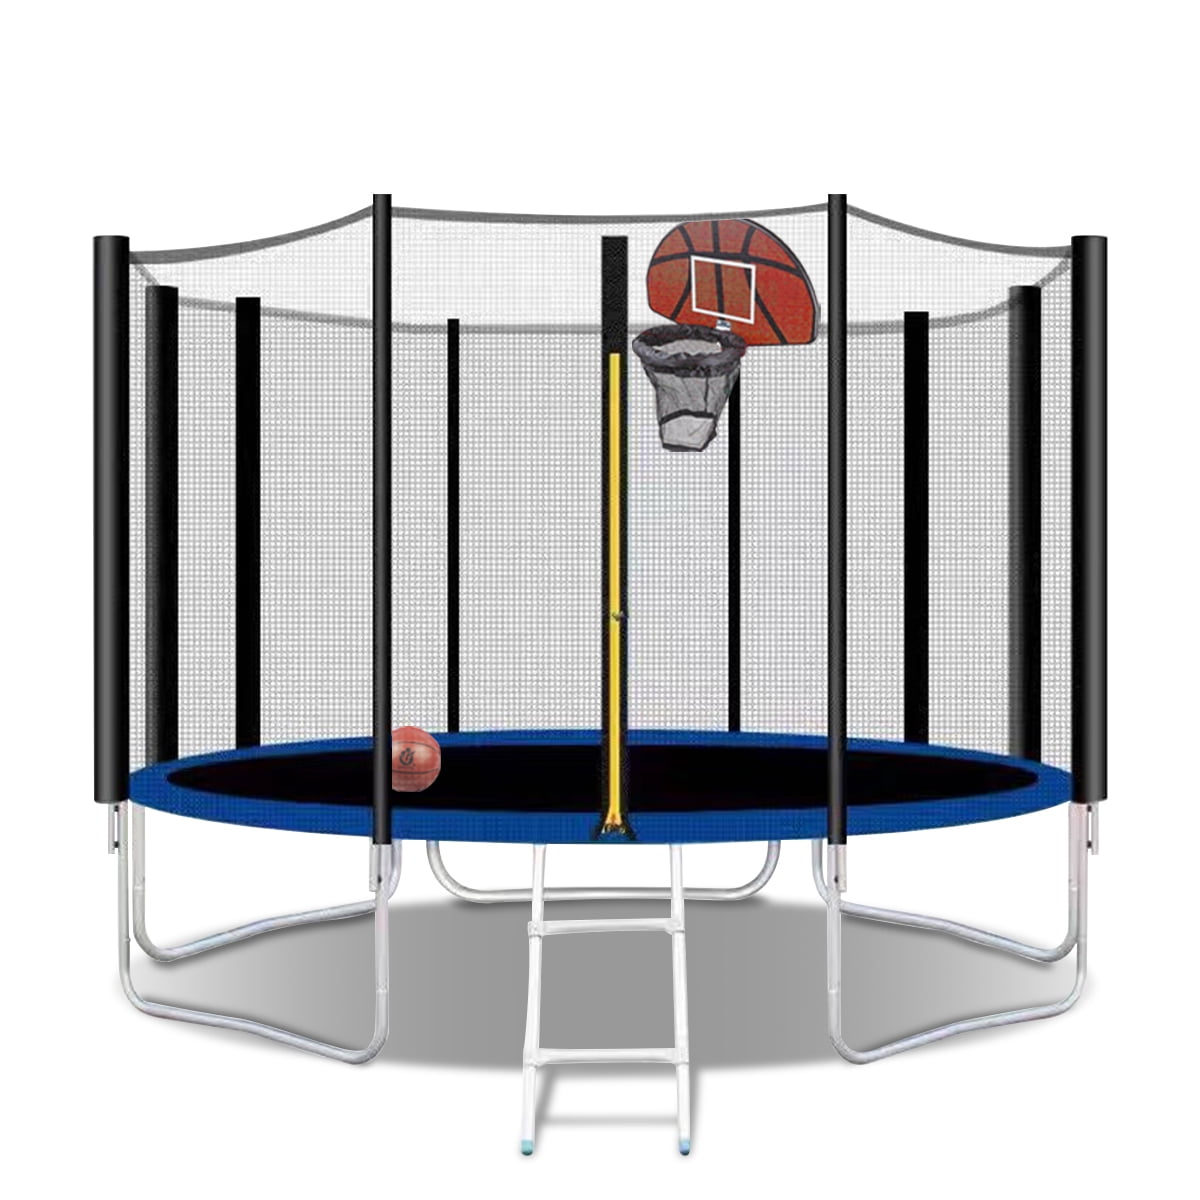 Romacci 12FT Trampoline with Basketball Hoop-Kids Trampoline with Trampoline Accessories: Trampoline Ladder, Safety Trampoline Net, Spring Cover Padding